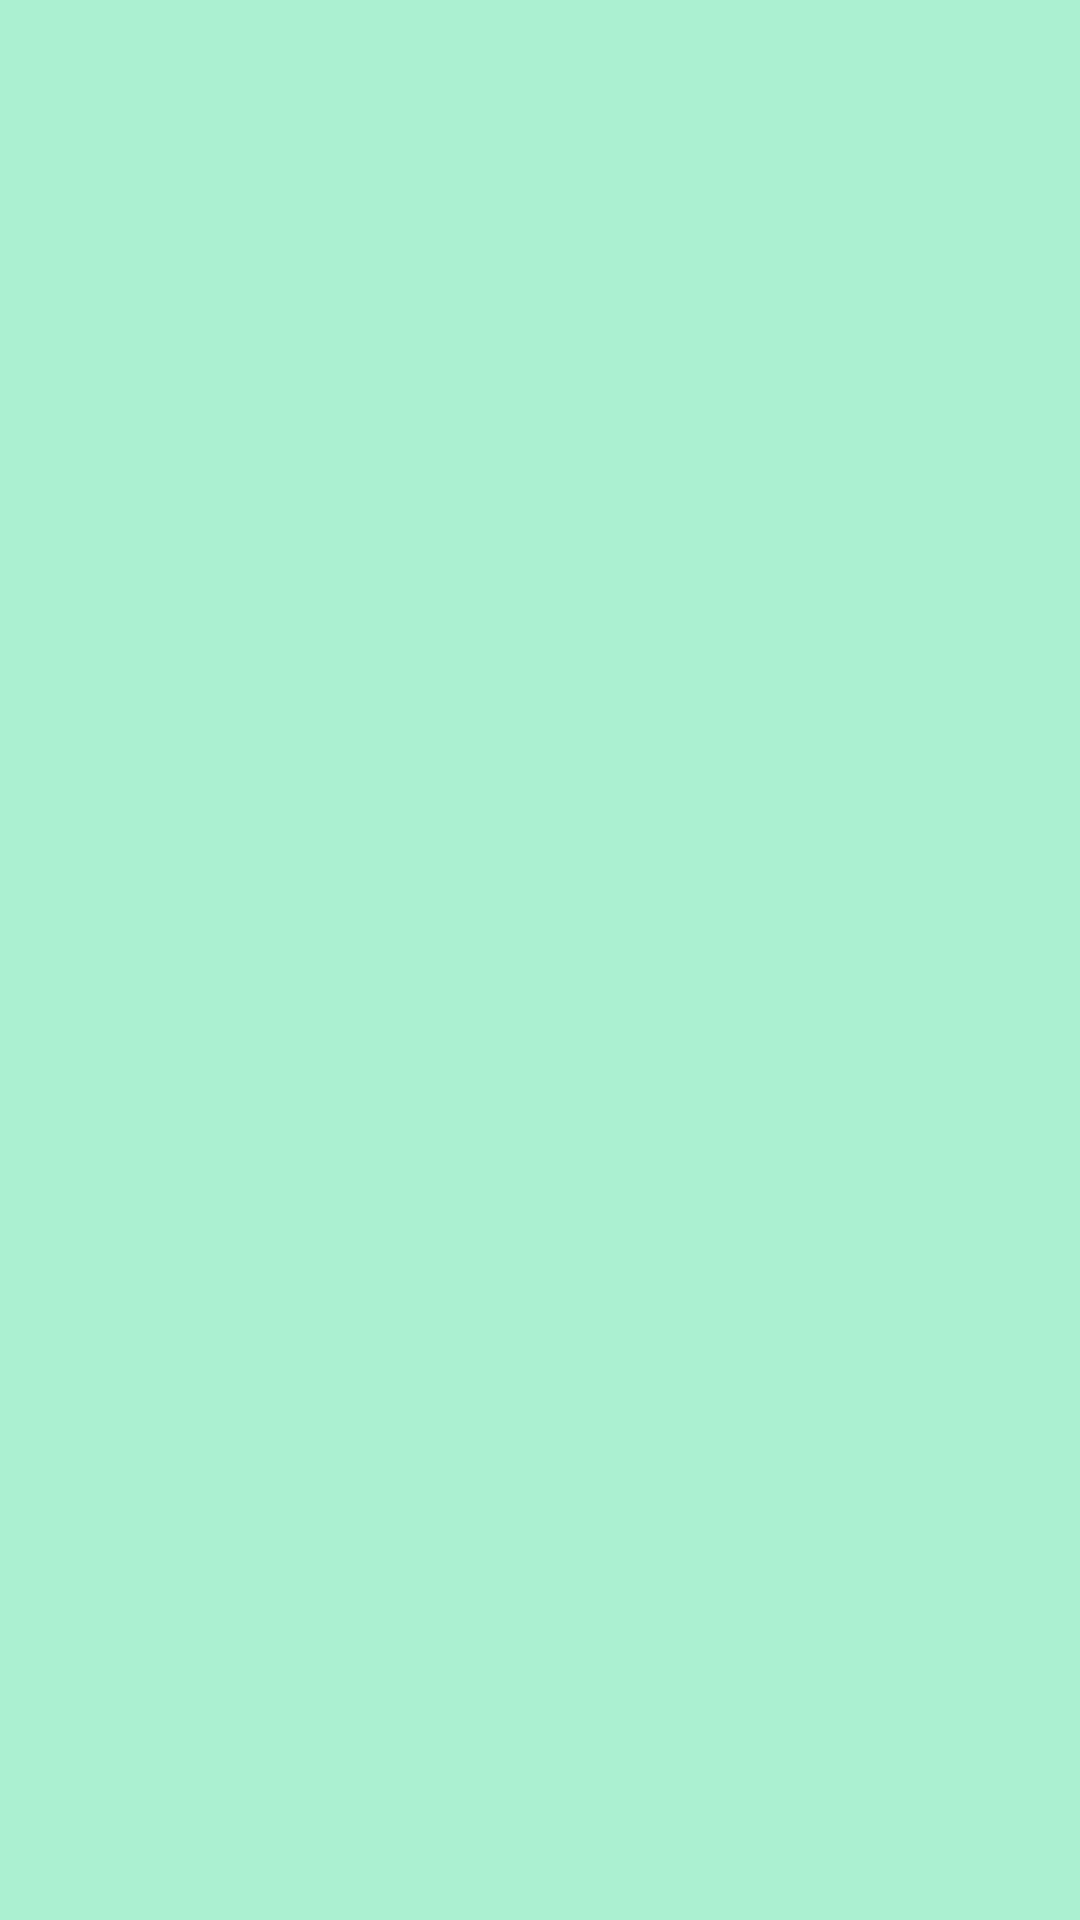 iPhone X Wallpaper Mint Green with image resolution 1080x1920 pixel. You can make this wallpaper for your iPhone 5, 6, 7, 8, X backgrounds, Mobile Screensaver, or iPad Lock Screen